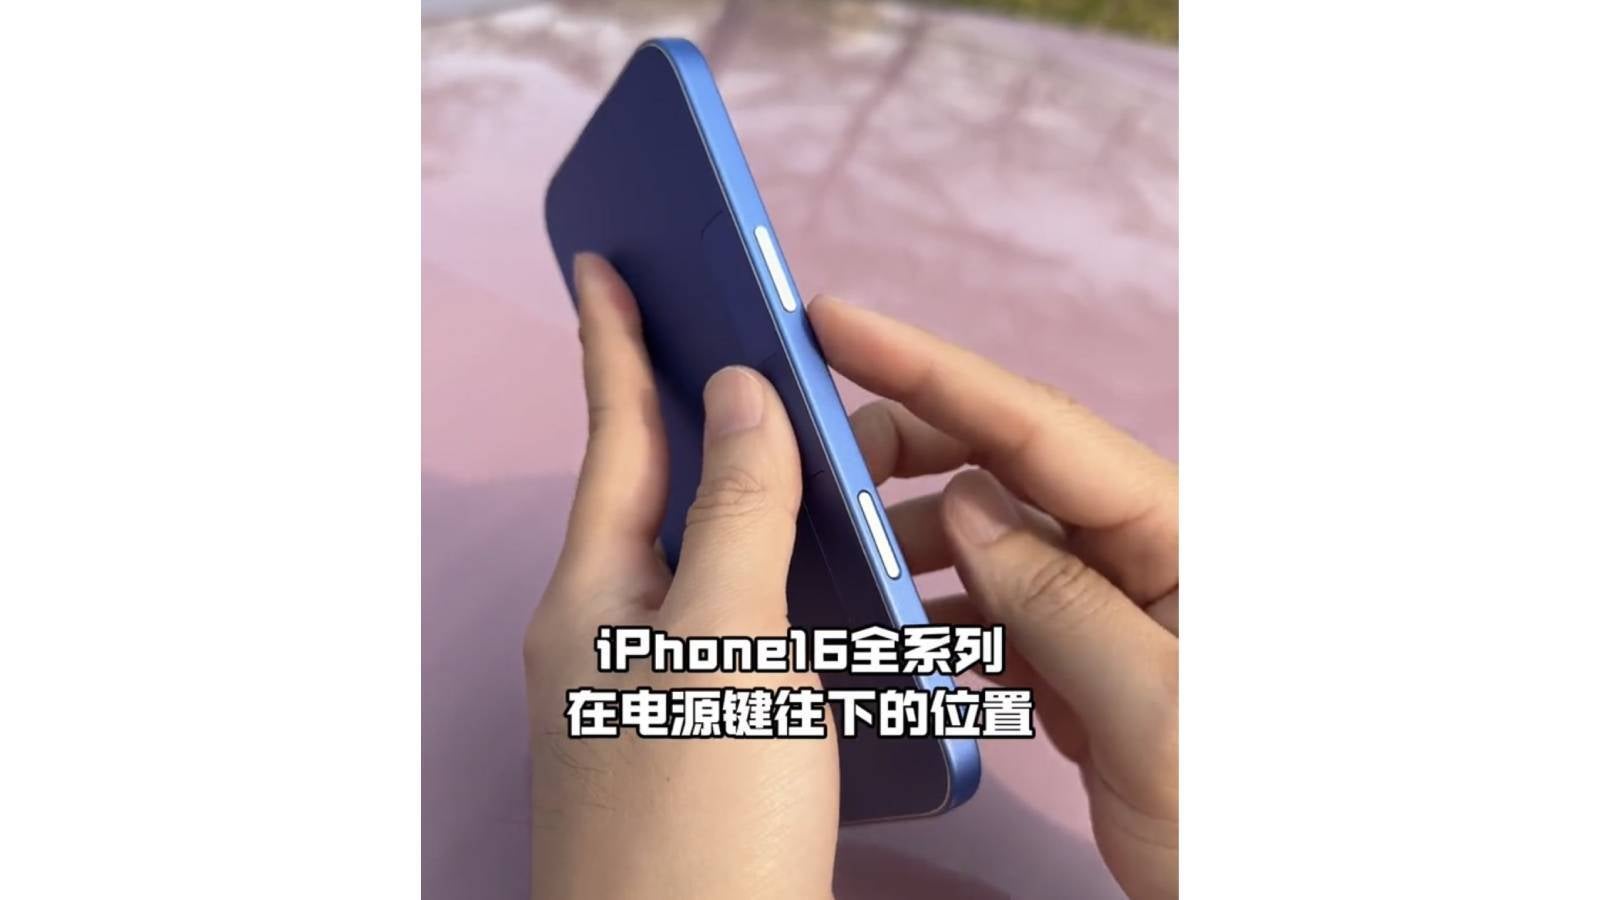 The entire iPhone 16 lineup is going to have a new Capture button - Few iPhone 16 surprises left as images of dummy units, case, and new color variants leaked